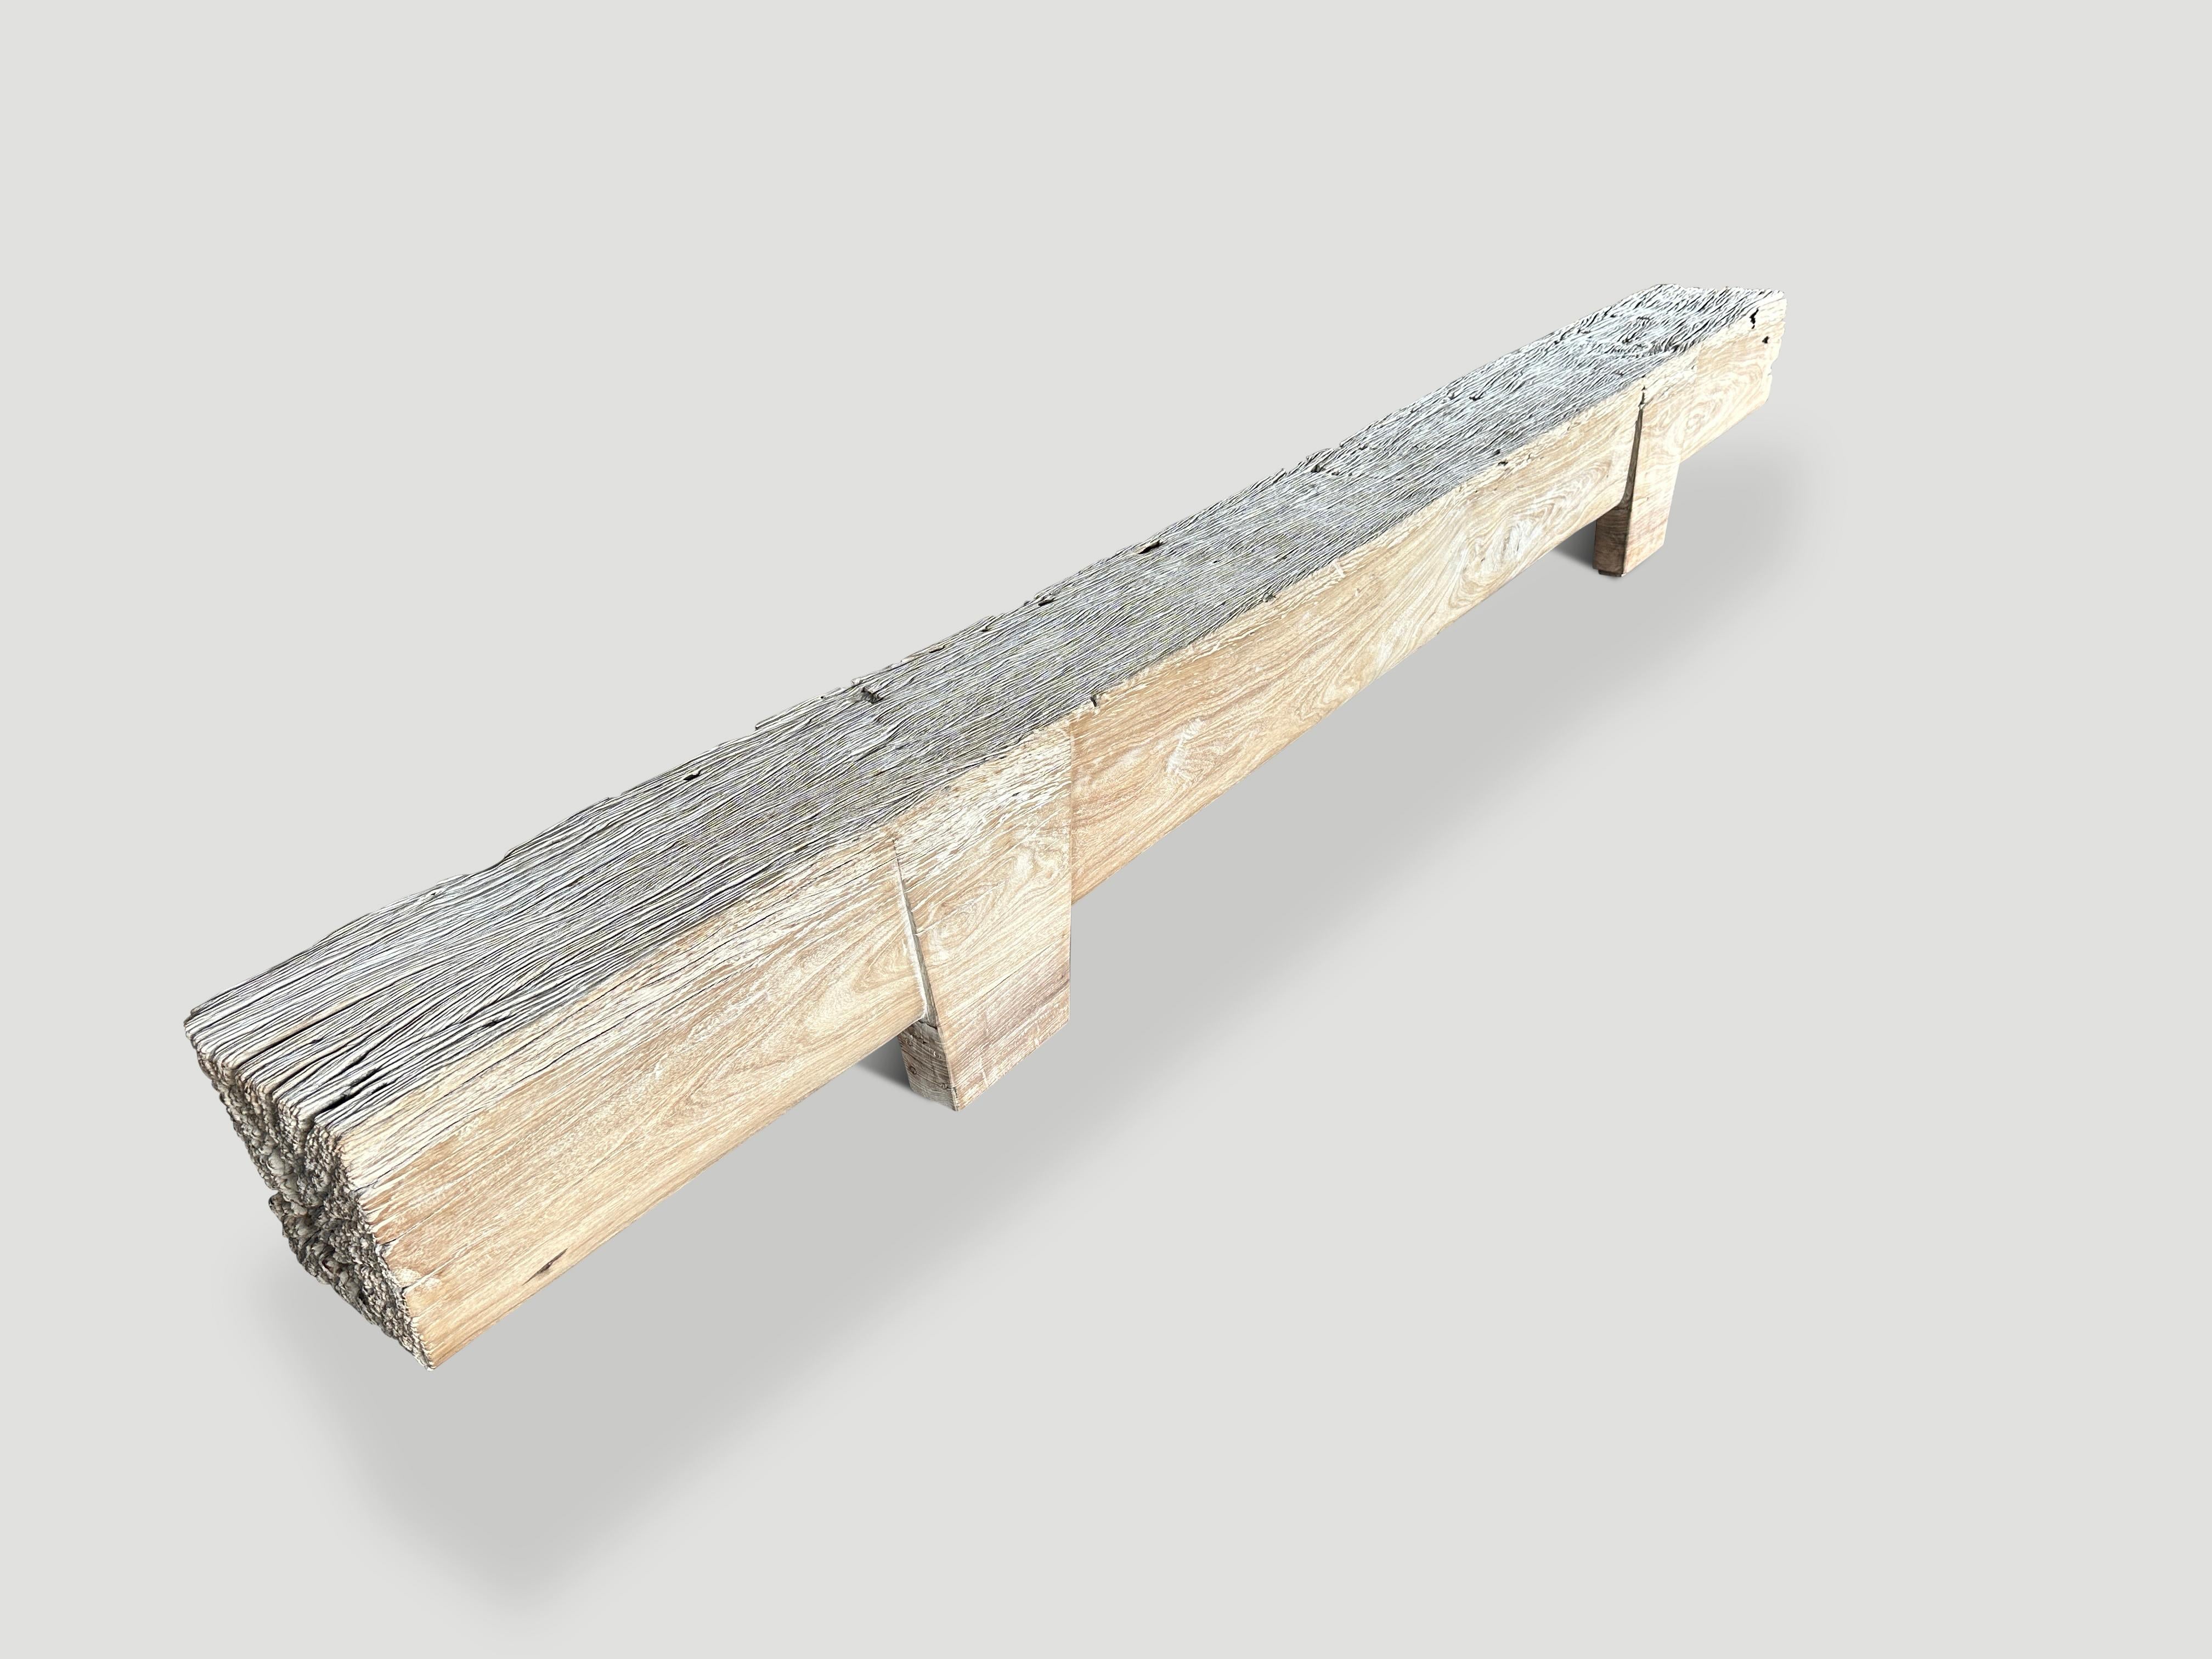 Impressive reclaimed bleached teak log bench. The legs are cut into this super rare long bench. The log is ten inches thick and floats seven inches off the floor on minimalist hand carved legs. We added a bleach and light white wash revealing the